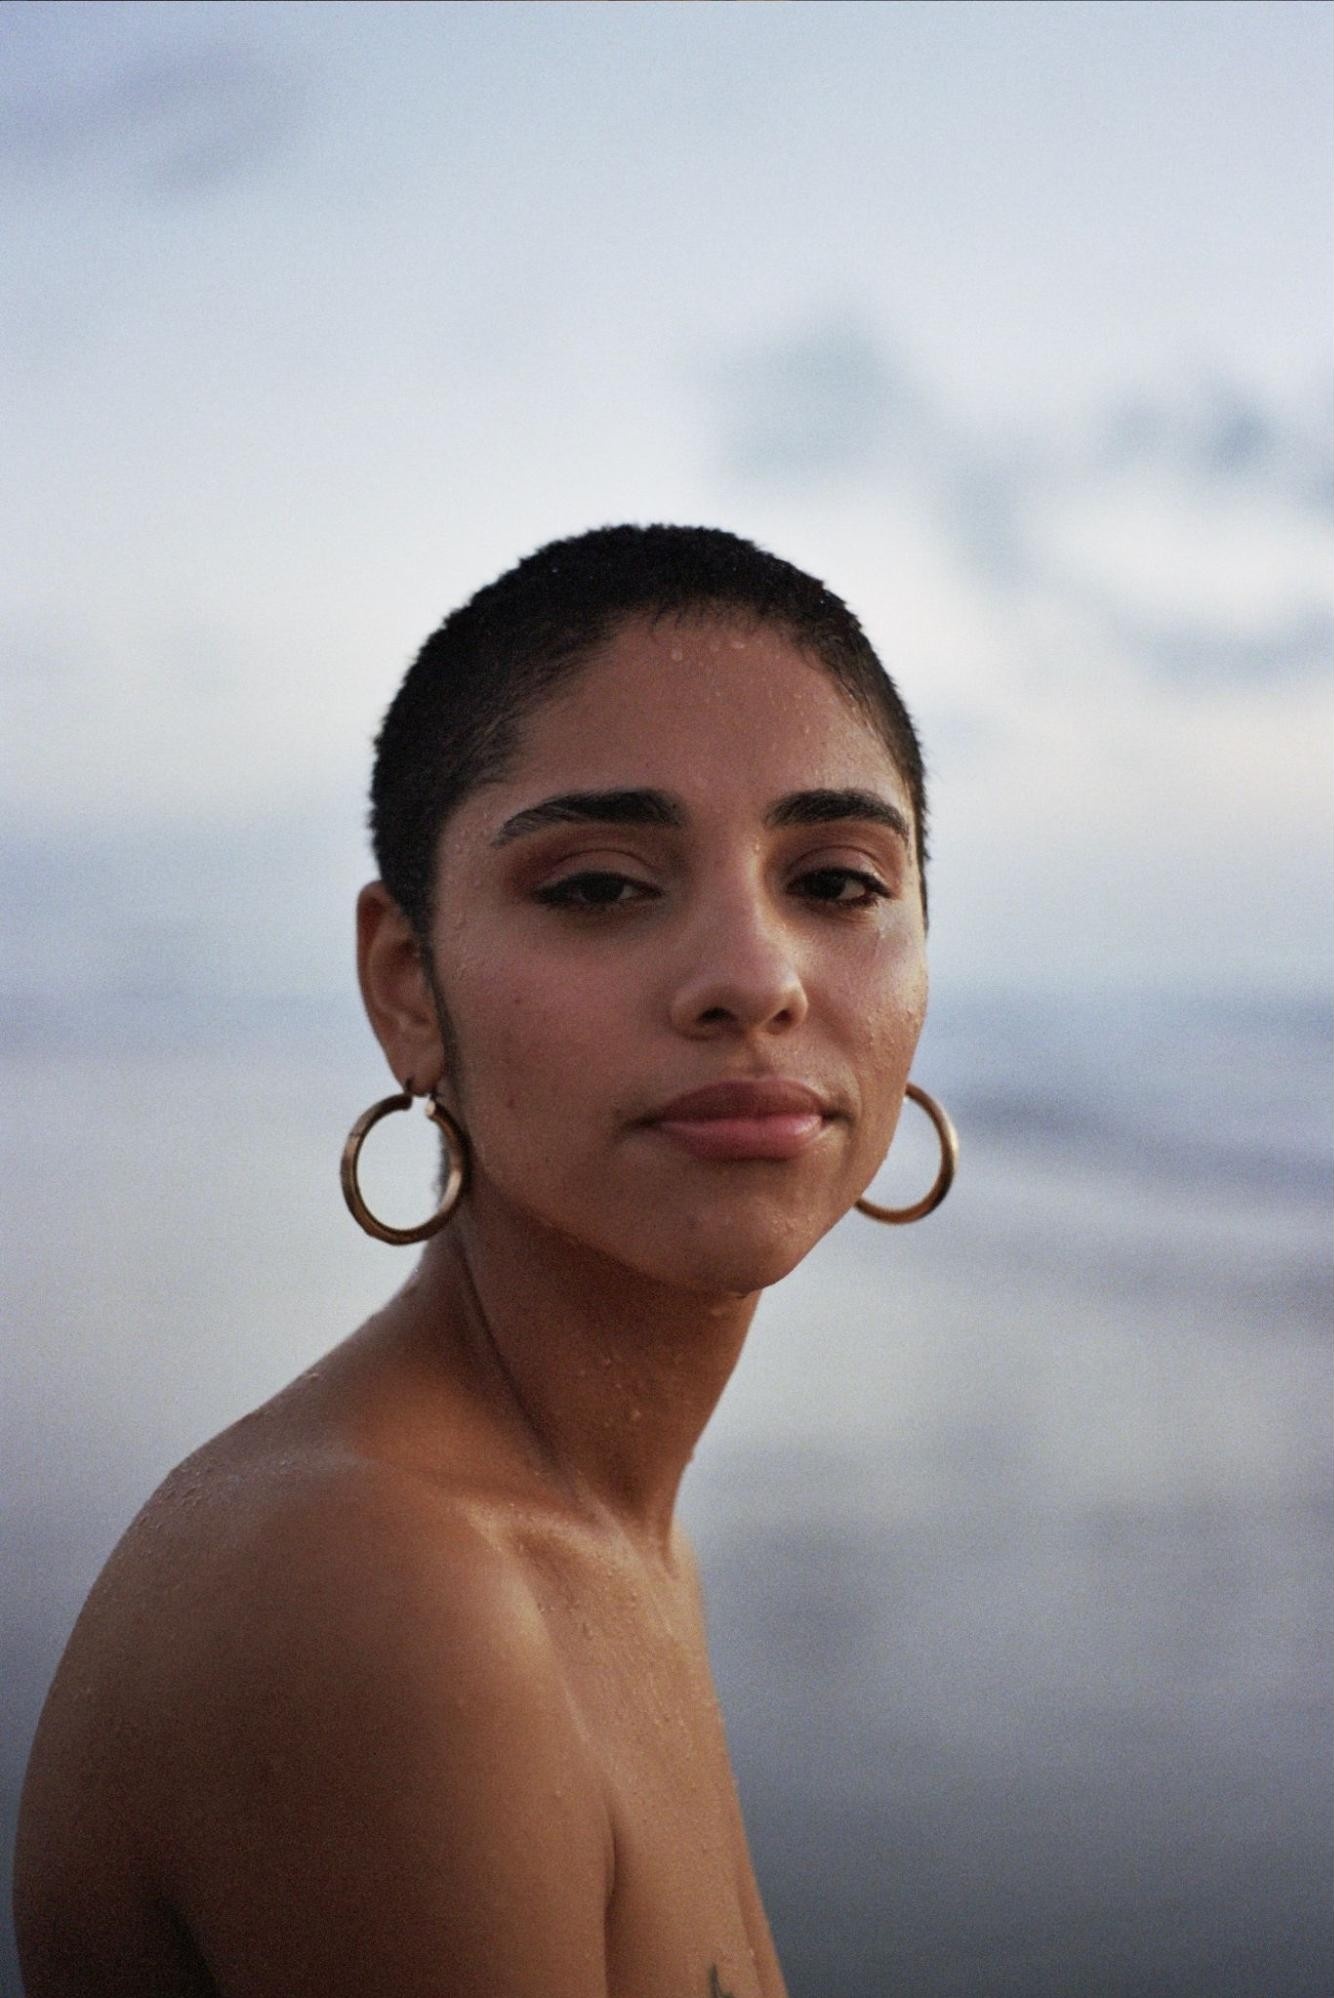 A Dominican American woman with short hair seen from the shoulders up. Her shoulders are bare, she wears gold hoop earrings, and is wet as if she has just been bathing in a body of water. In the background is a hazy sky.